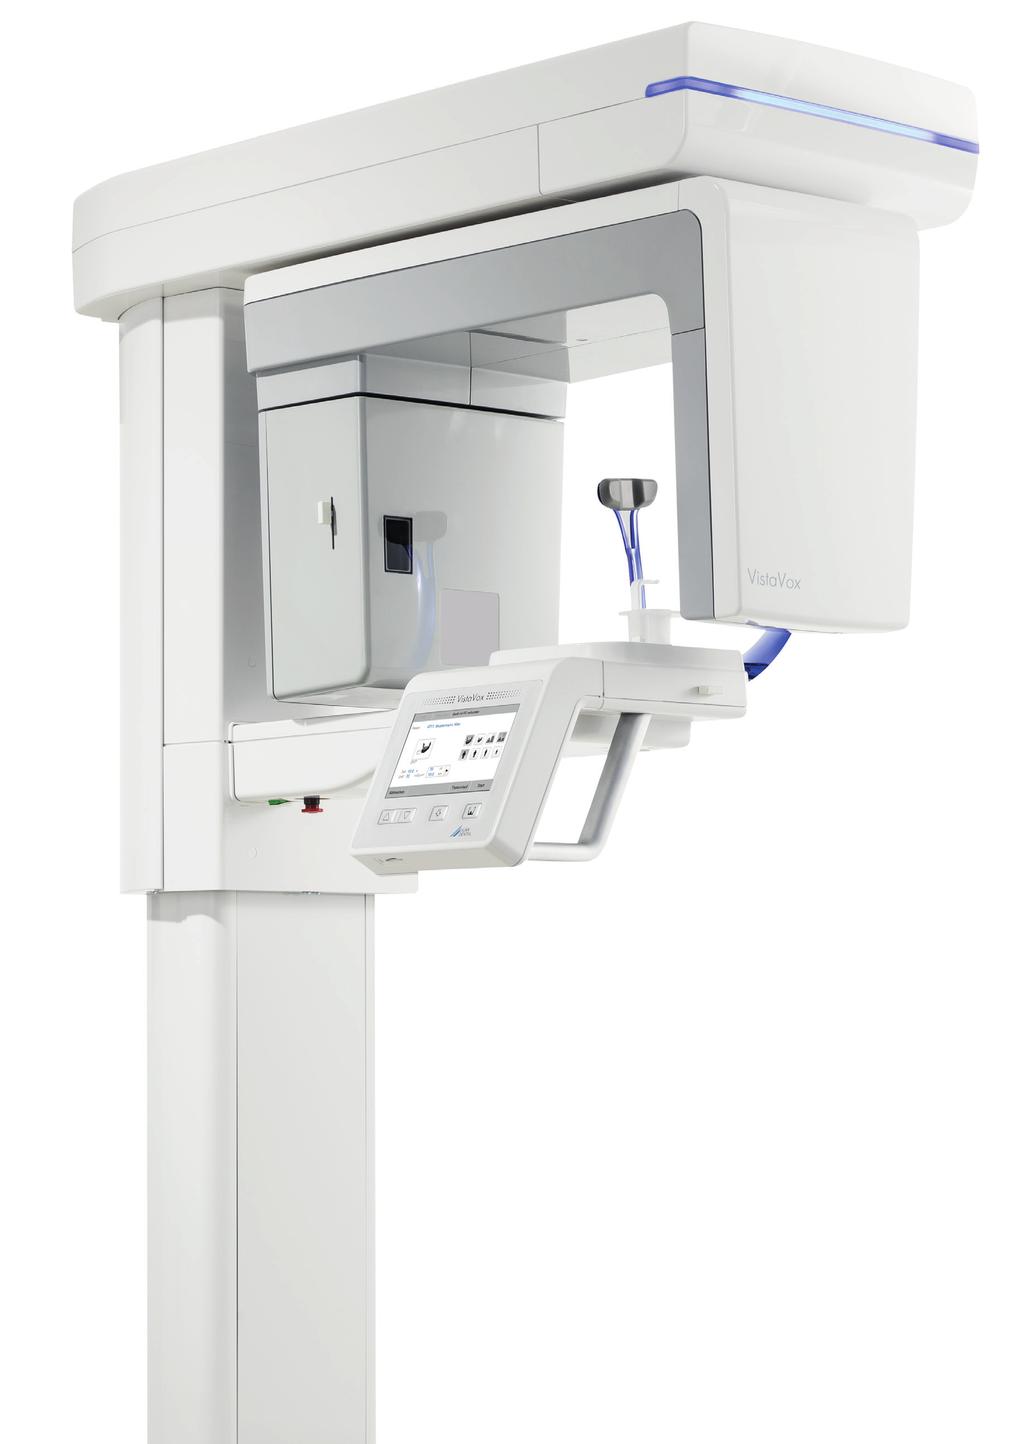 Taking diagnostics to the next level VistaVox S combines diagnostic reliability with efficiency and lower radiation doses Key features: Ideal 3D imaging volume matched to the shape of the jaw